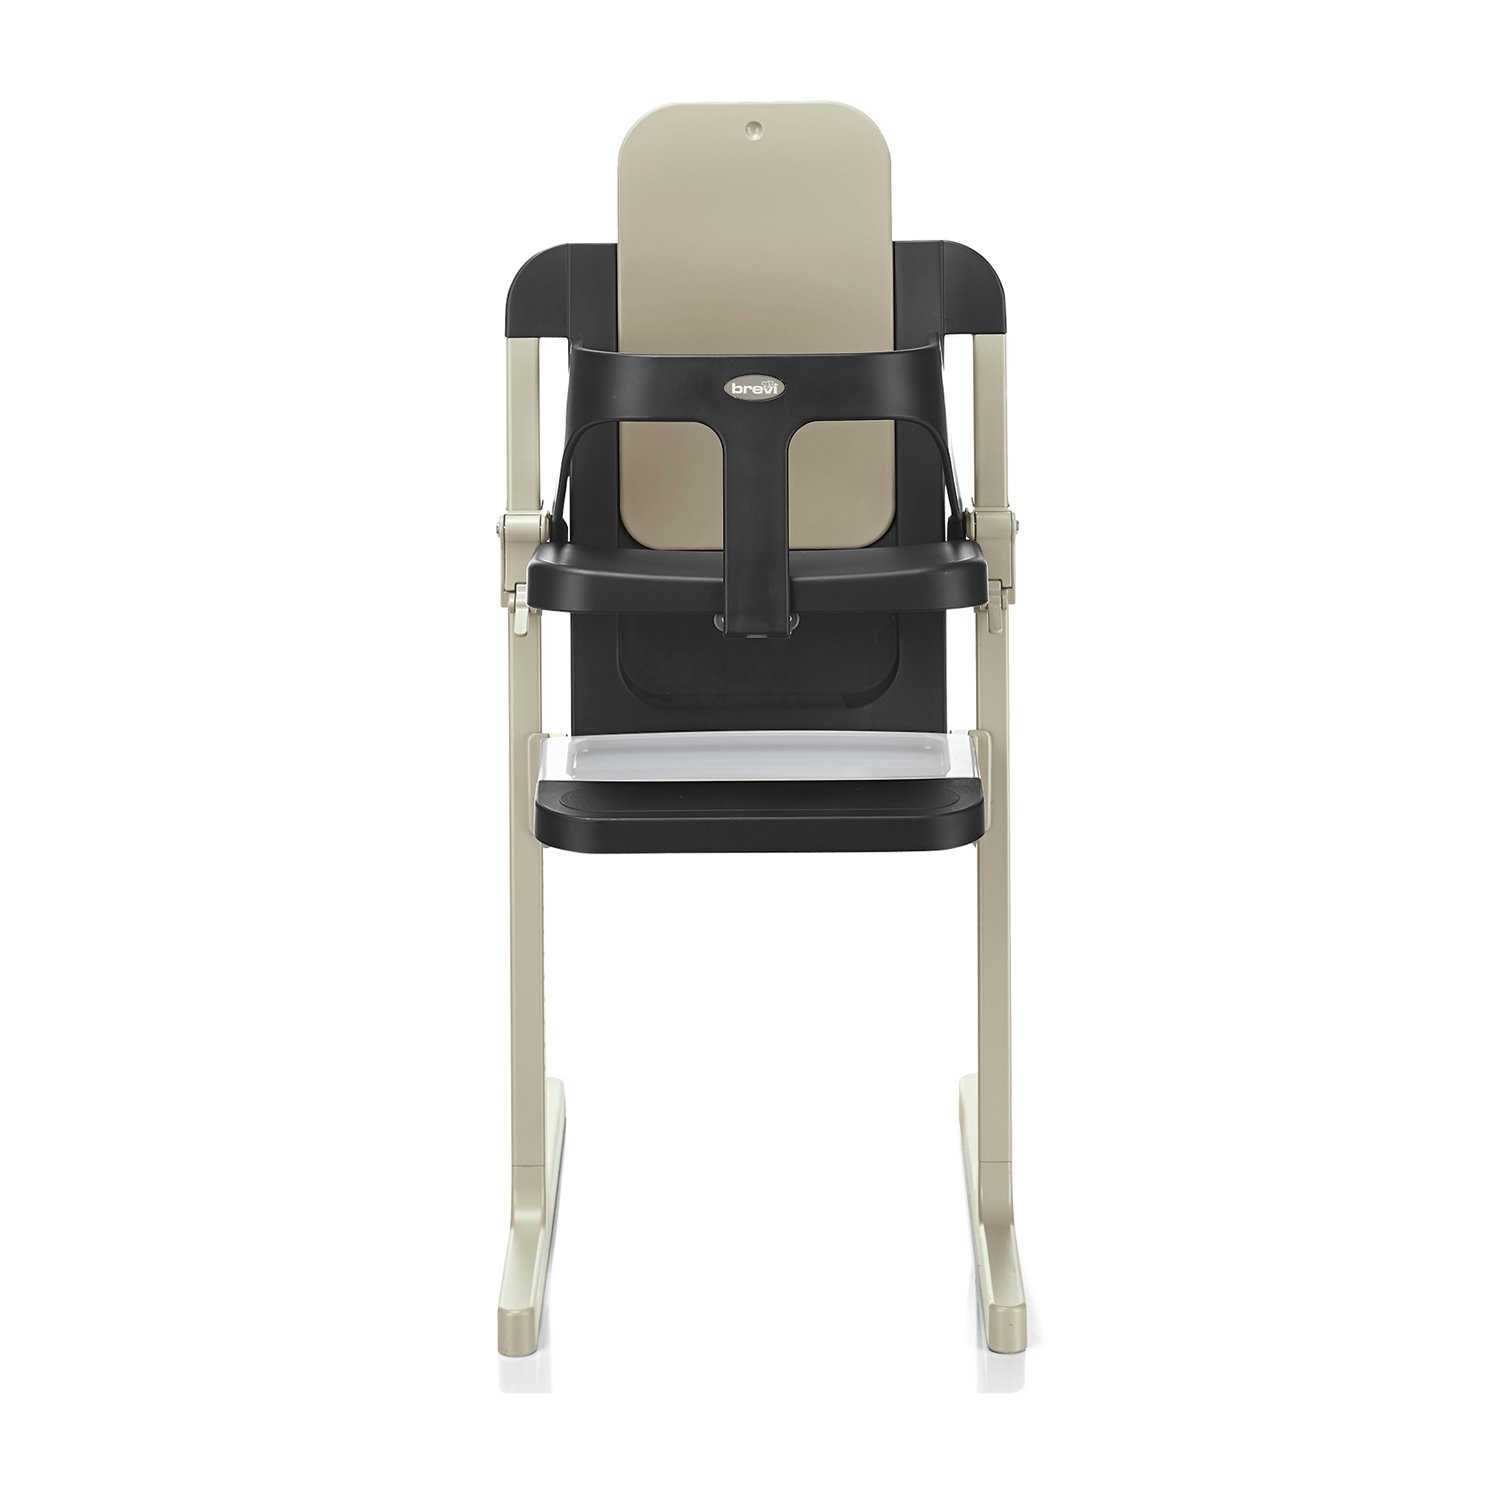 Slex Evo 212258 Brevi High Chair Made in Italy Anthracite Grey